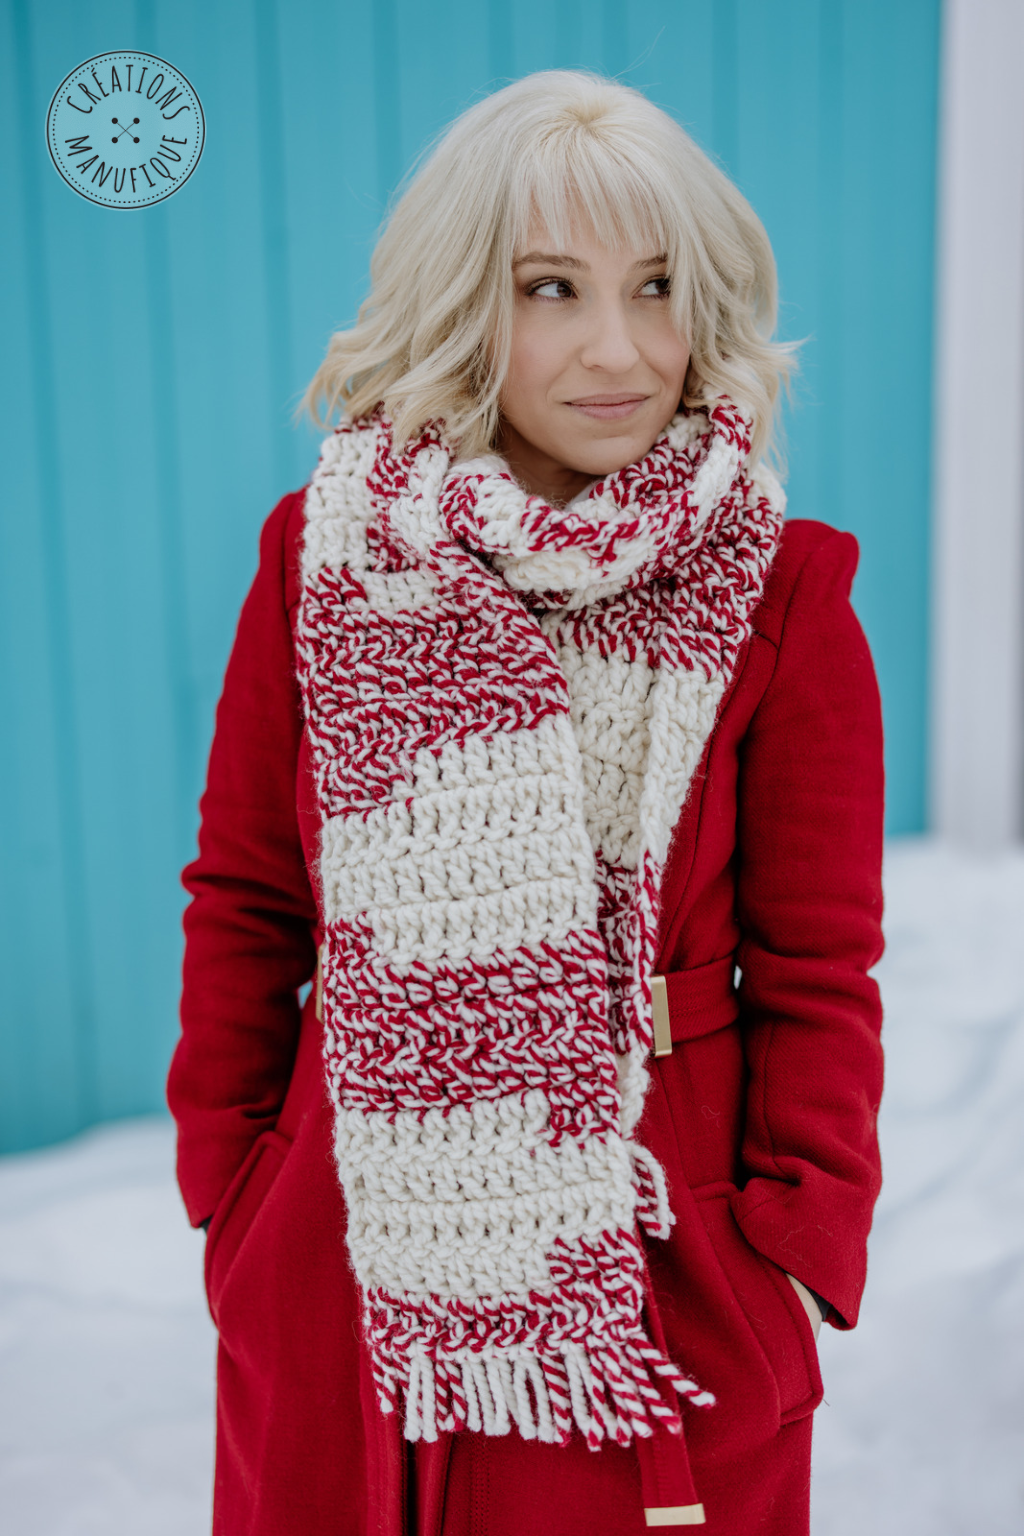 Standard scarf - Candy cane - ready to go